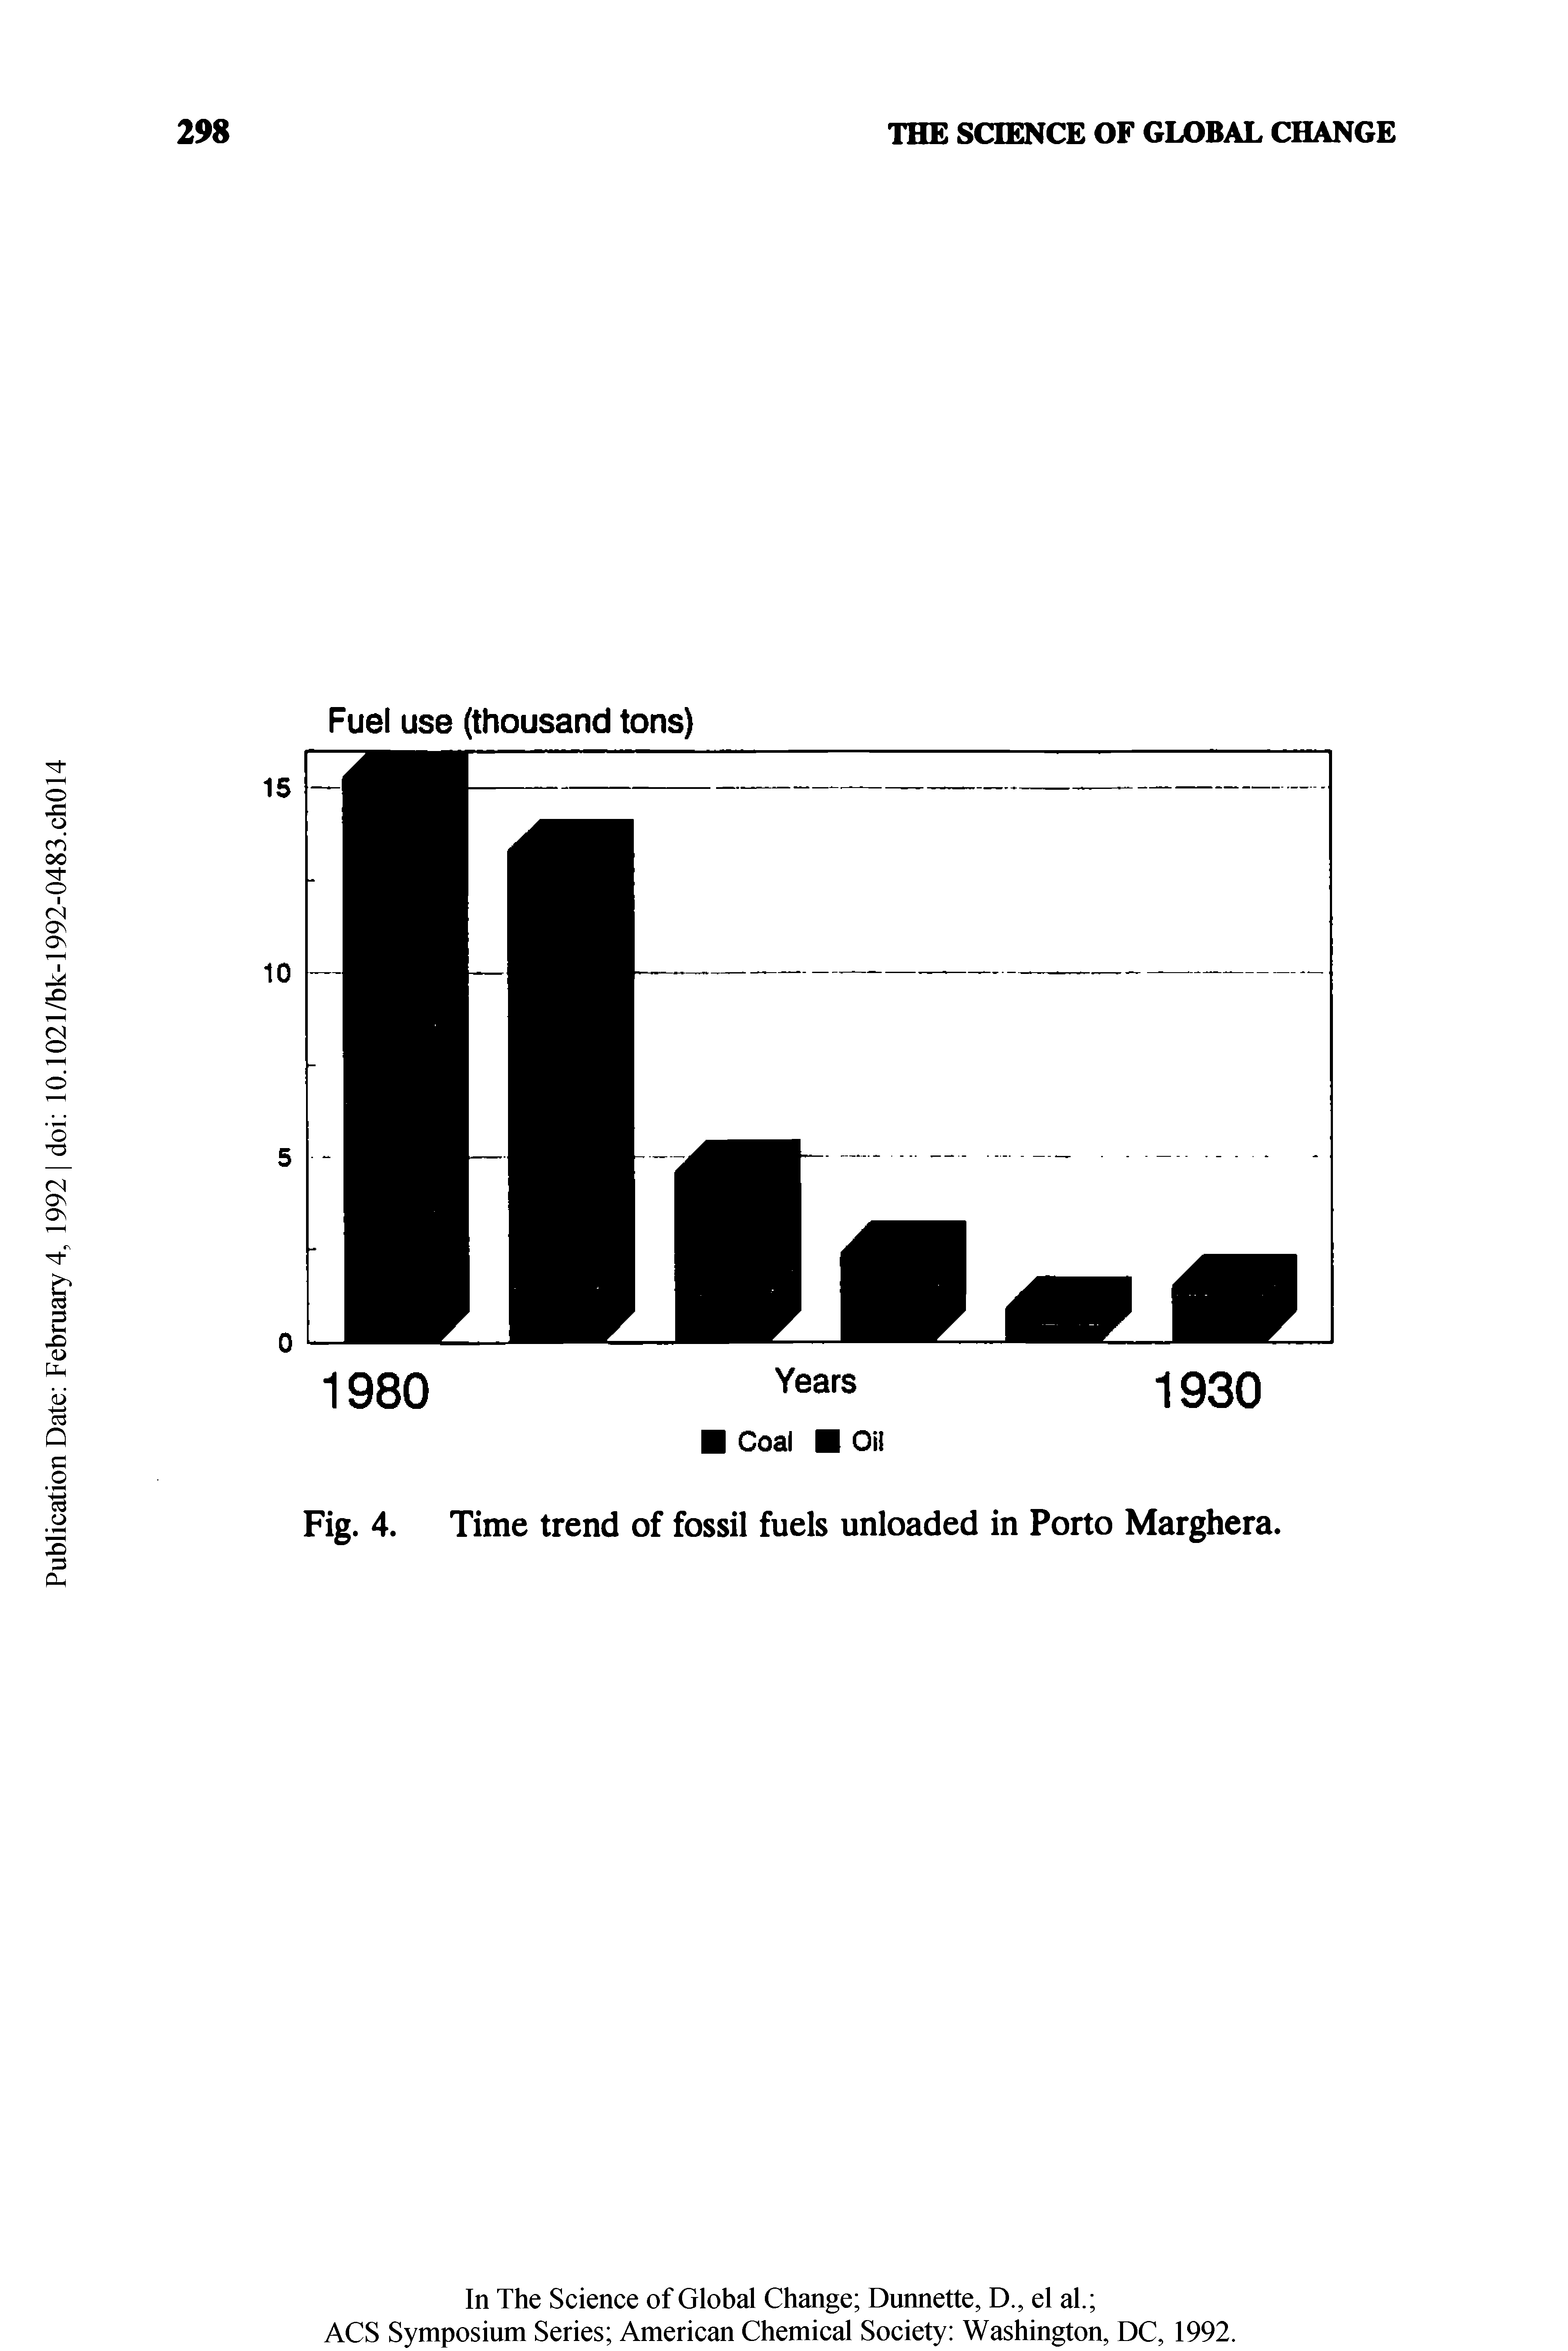 Fig. 4. Time trend of fossil fuels unloaded in Porto Marghera.